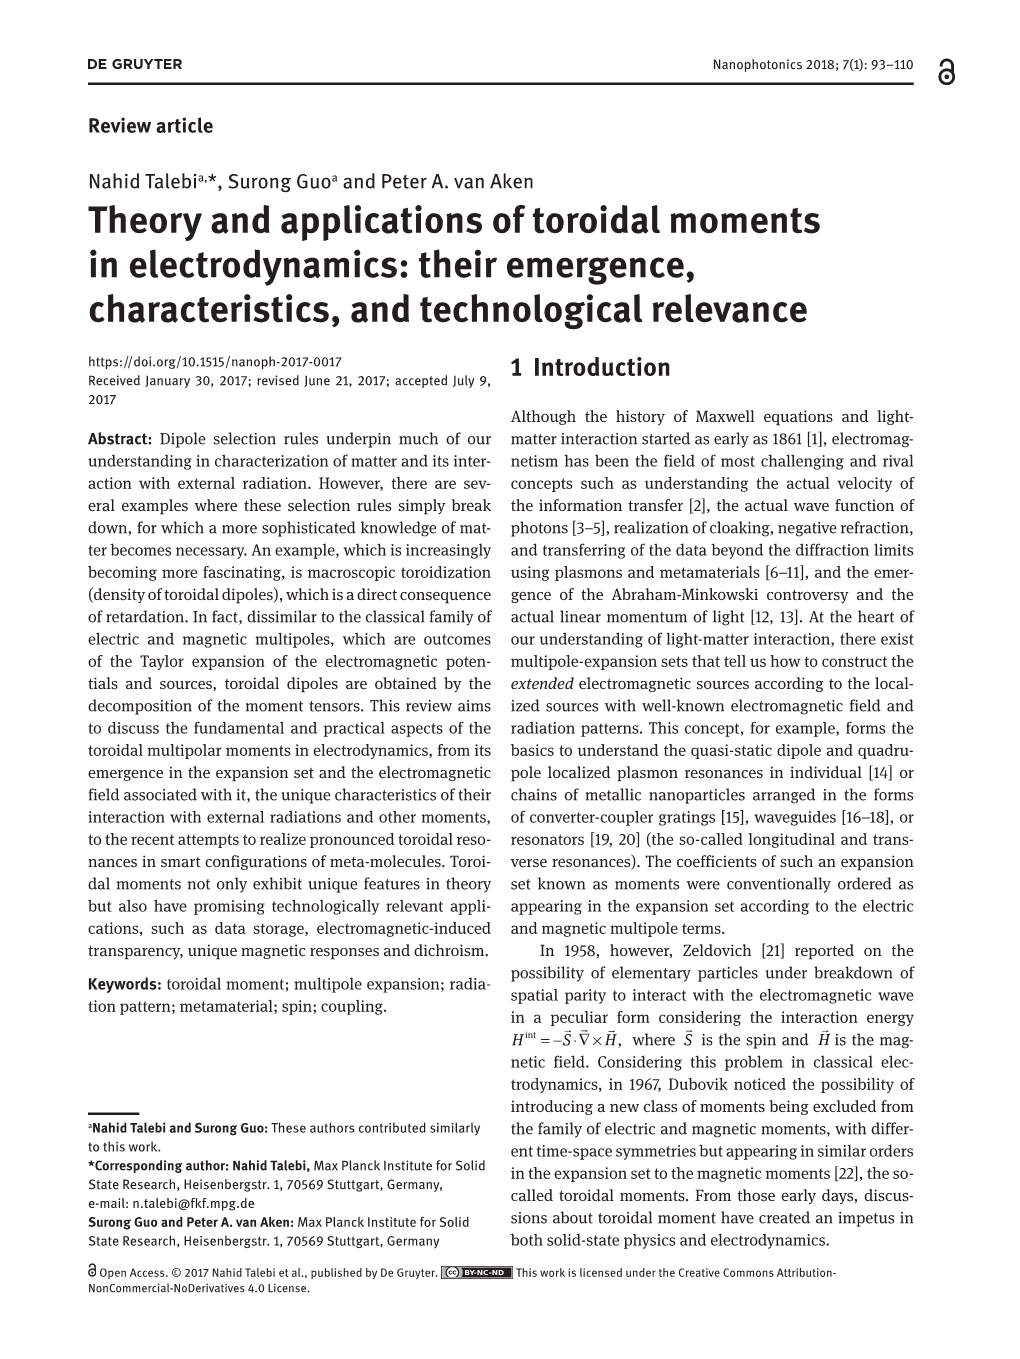 Theory and Applications of Toroidal Moments in Electrodynamics